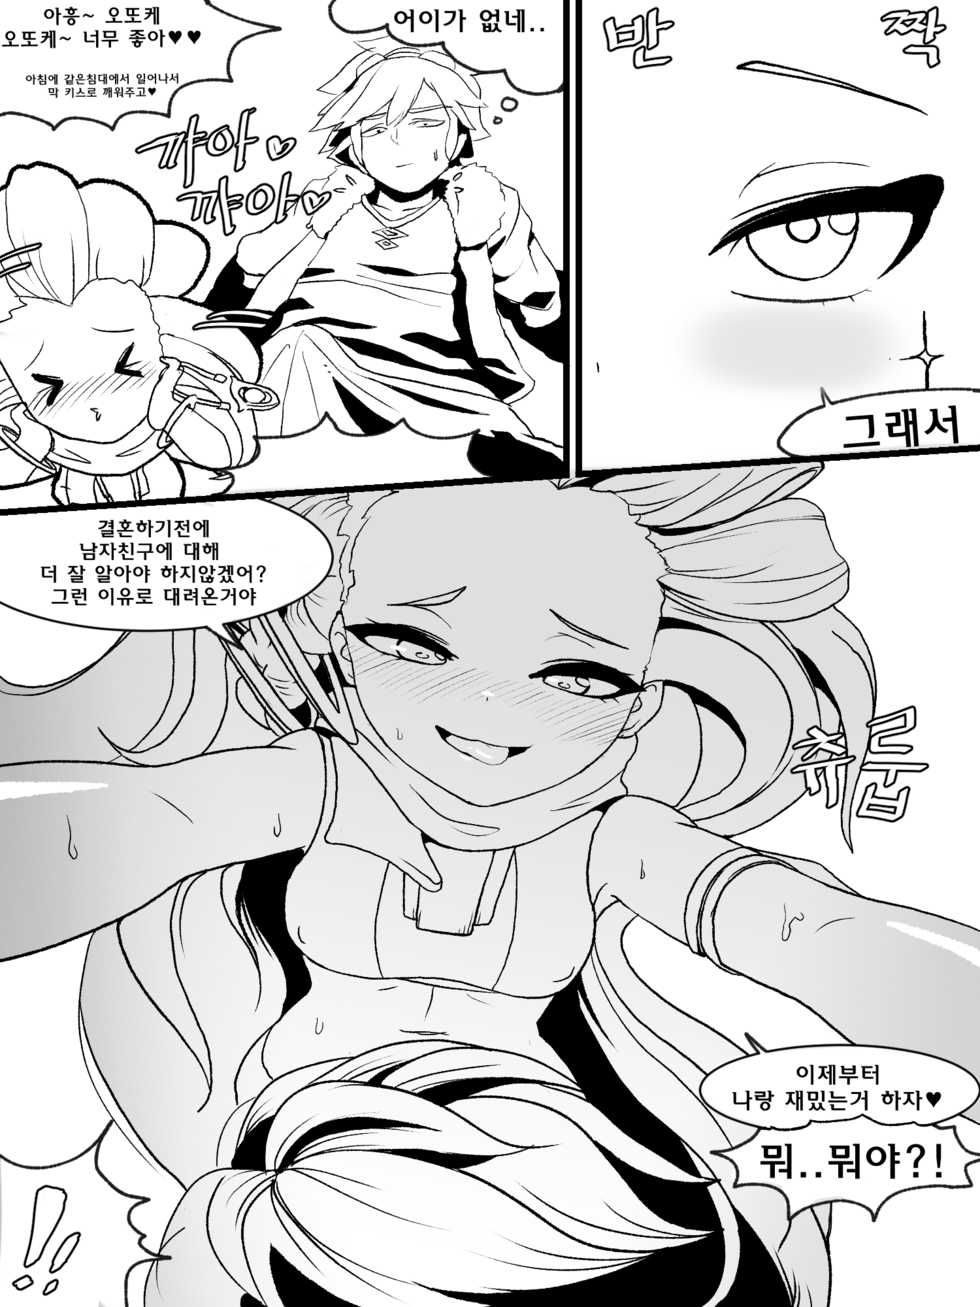 [Kim Toxic] The reality in the starlight | 별빛속에 리얼 (League of Legends) [Korean] [Decensored] - Page 10